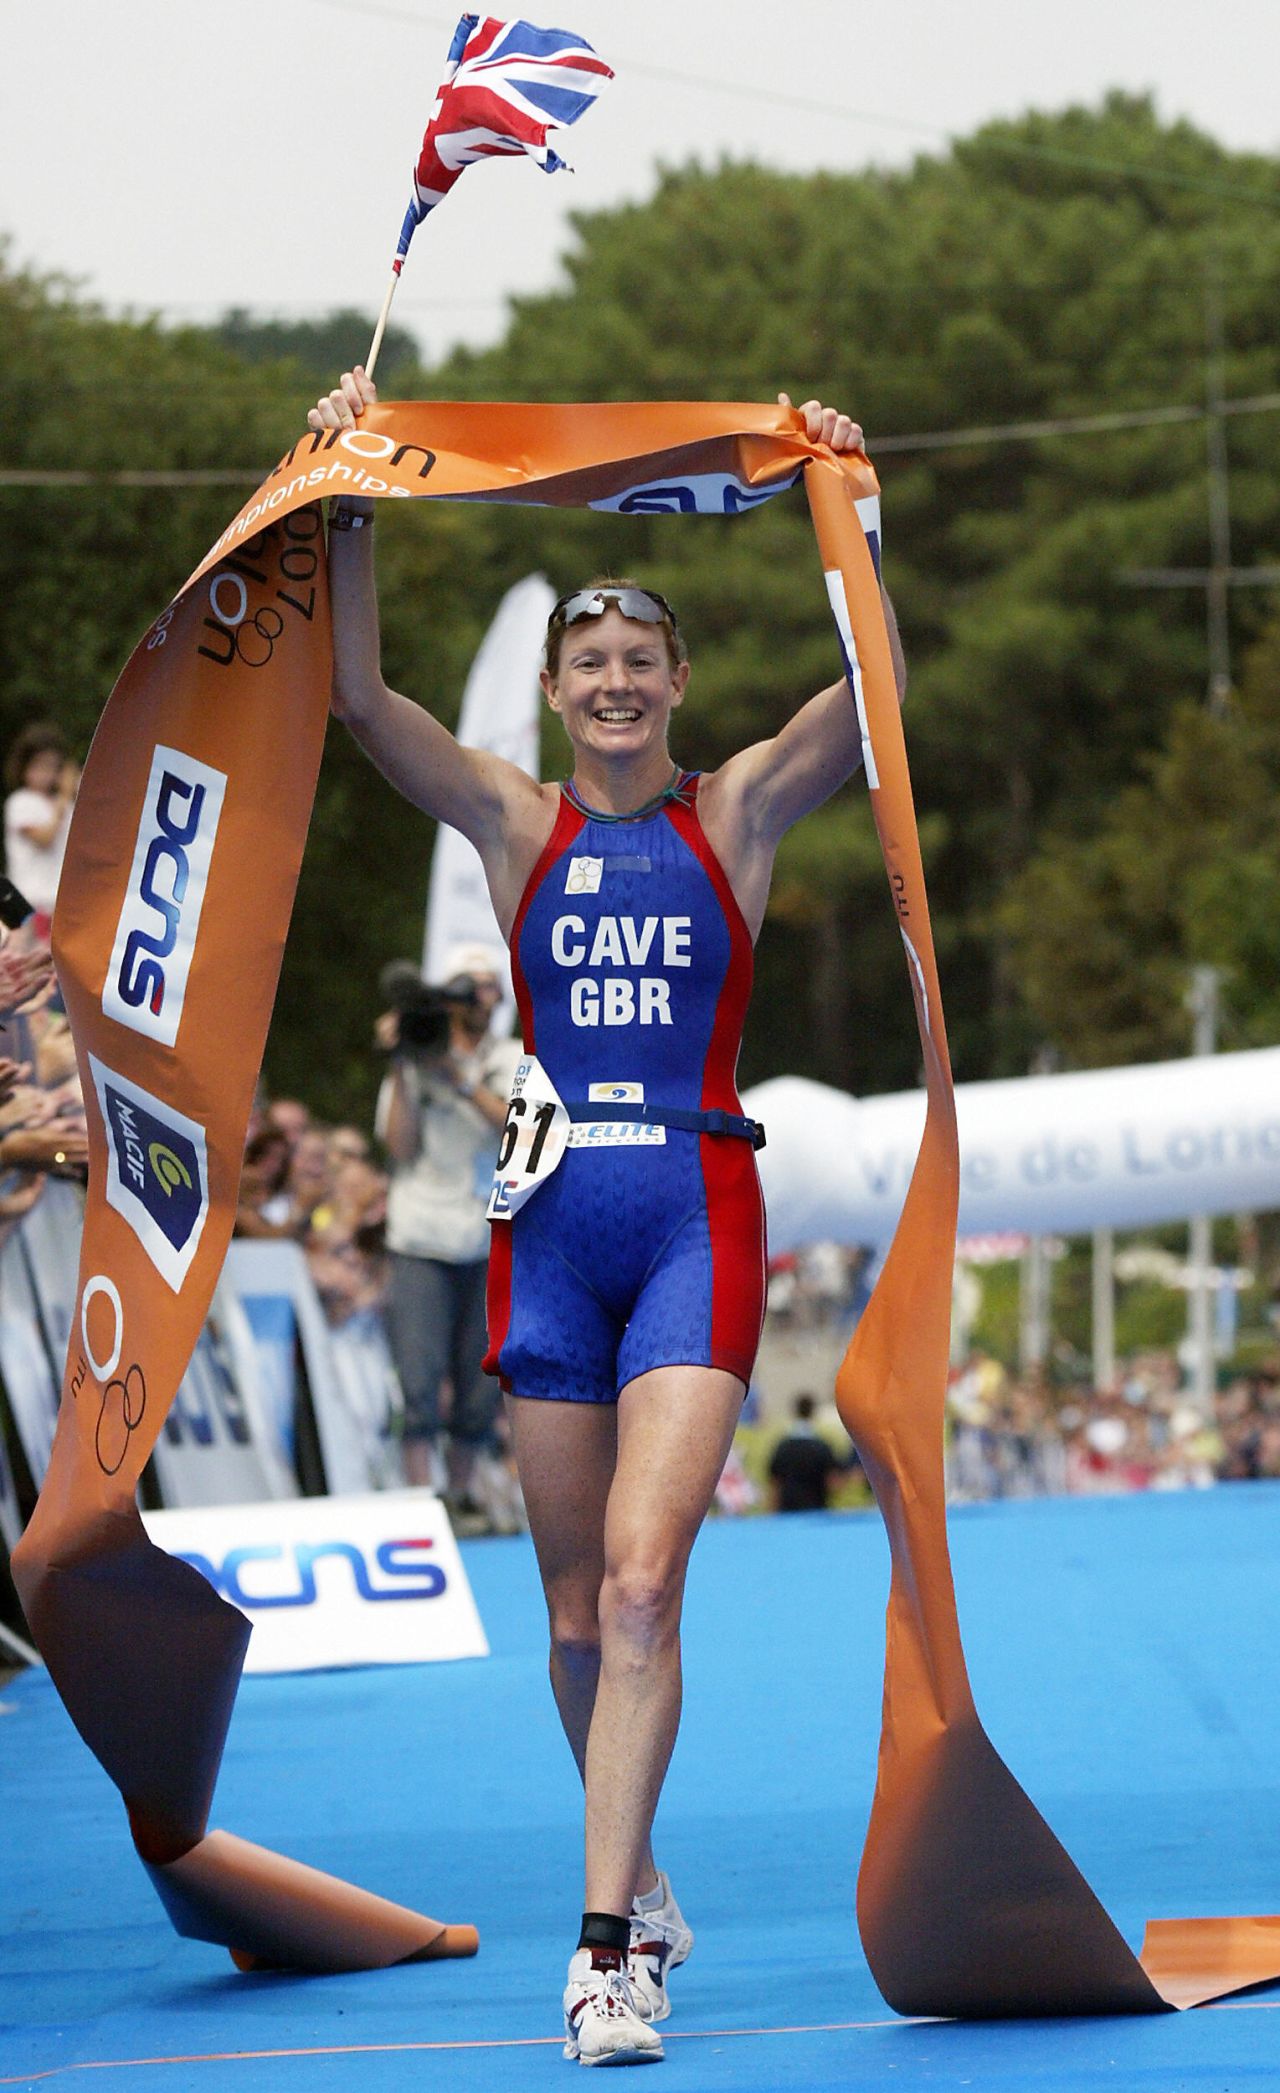 Leanda Cave became the first female in history to win both the Ironman World Championship and the Half Ironman World Championship in 2012.  The British athlete finished the 2.4-mile swim, 112-mile bike ride and 26.2-mile run in nine hours, 15 minutes and 54 seconds, <a href="http://www.bbc.co.uk/sport/0/triathlon/19940336" target="_blank" target="_blank">according to the BBC</a>. 